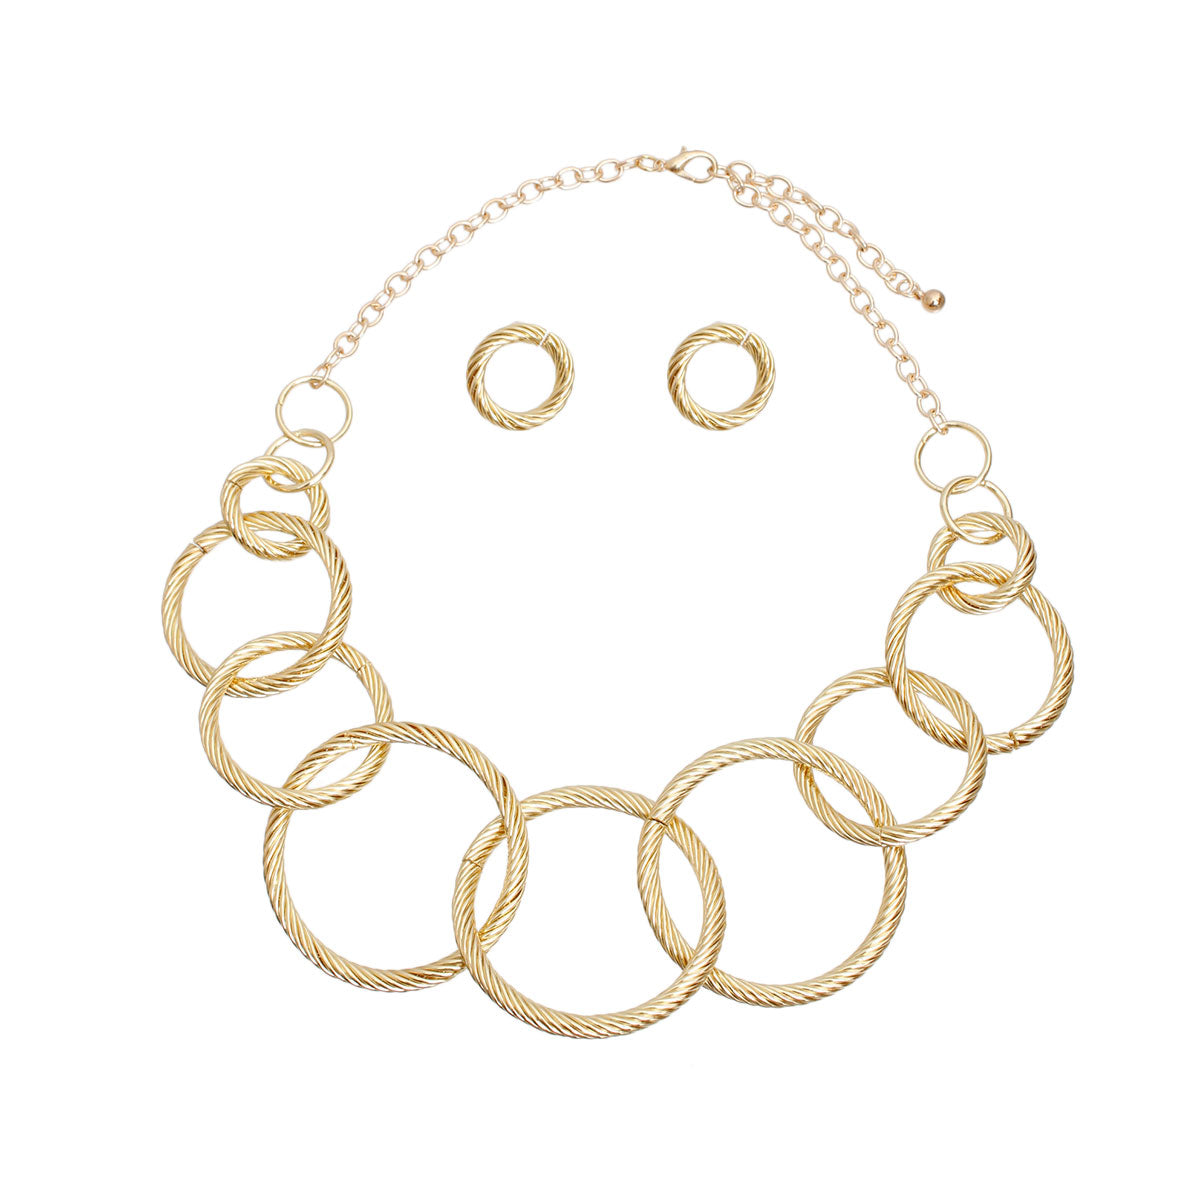 Gold Twisted Ring Necklace Set